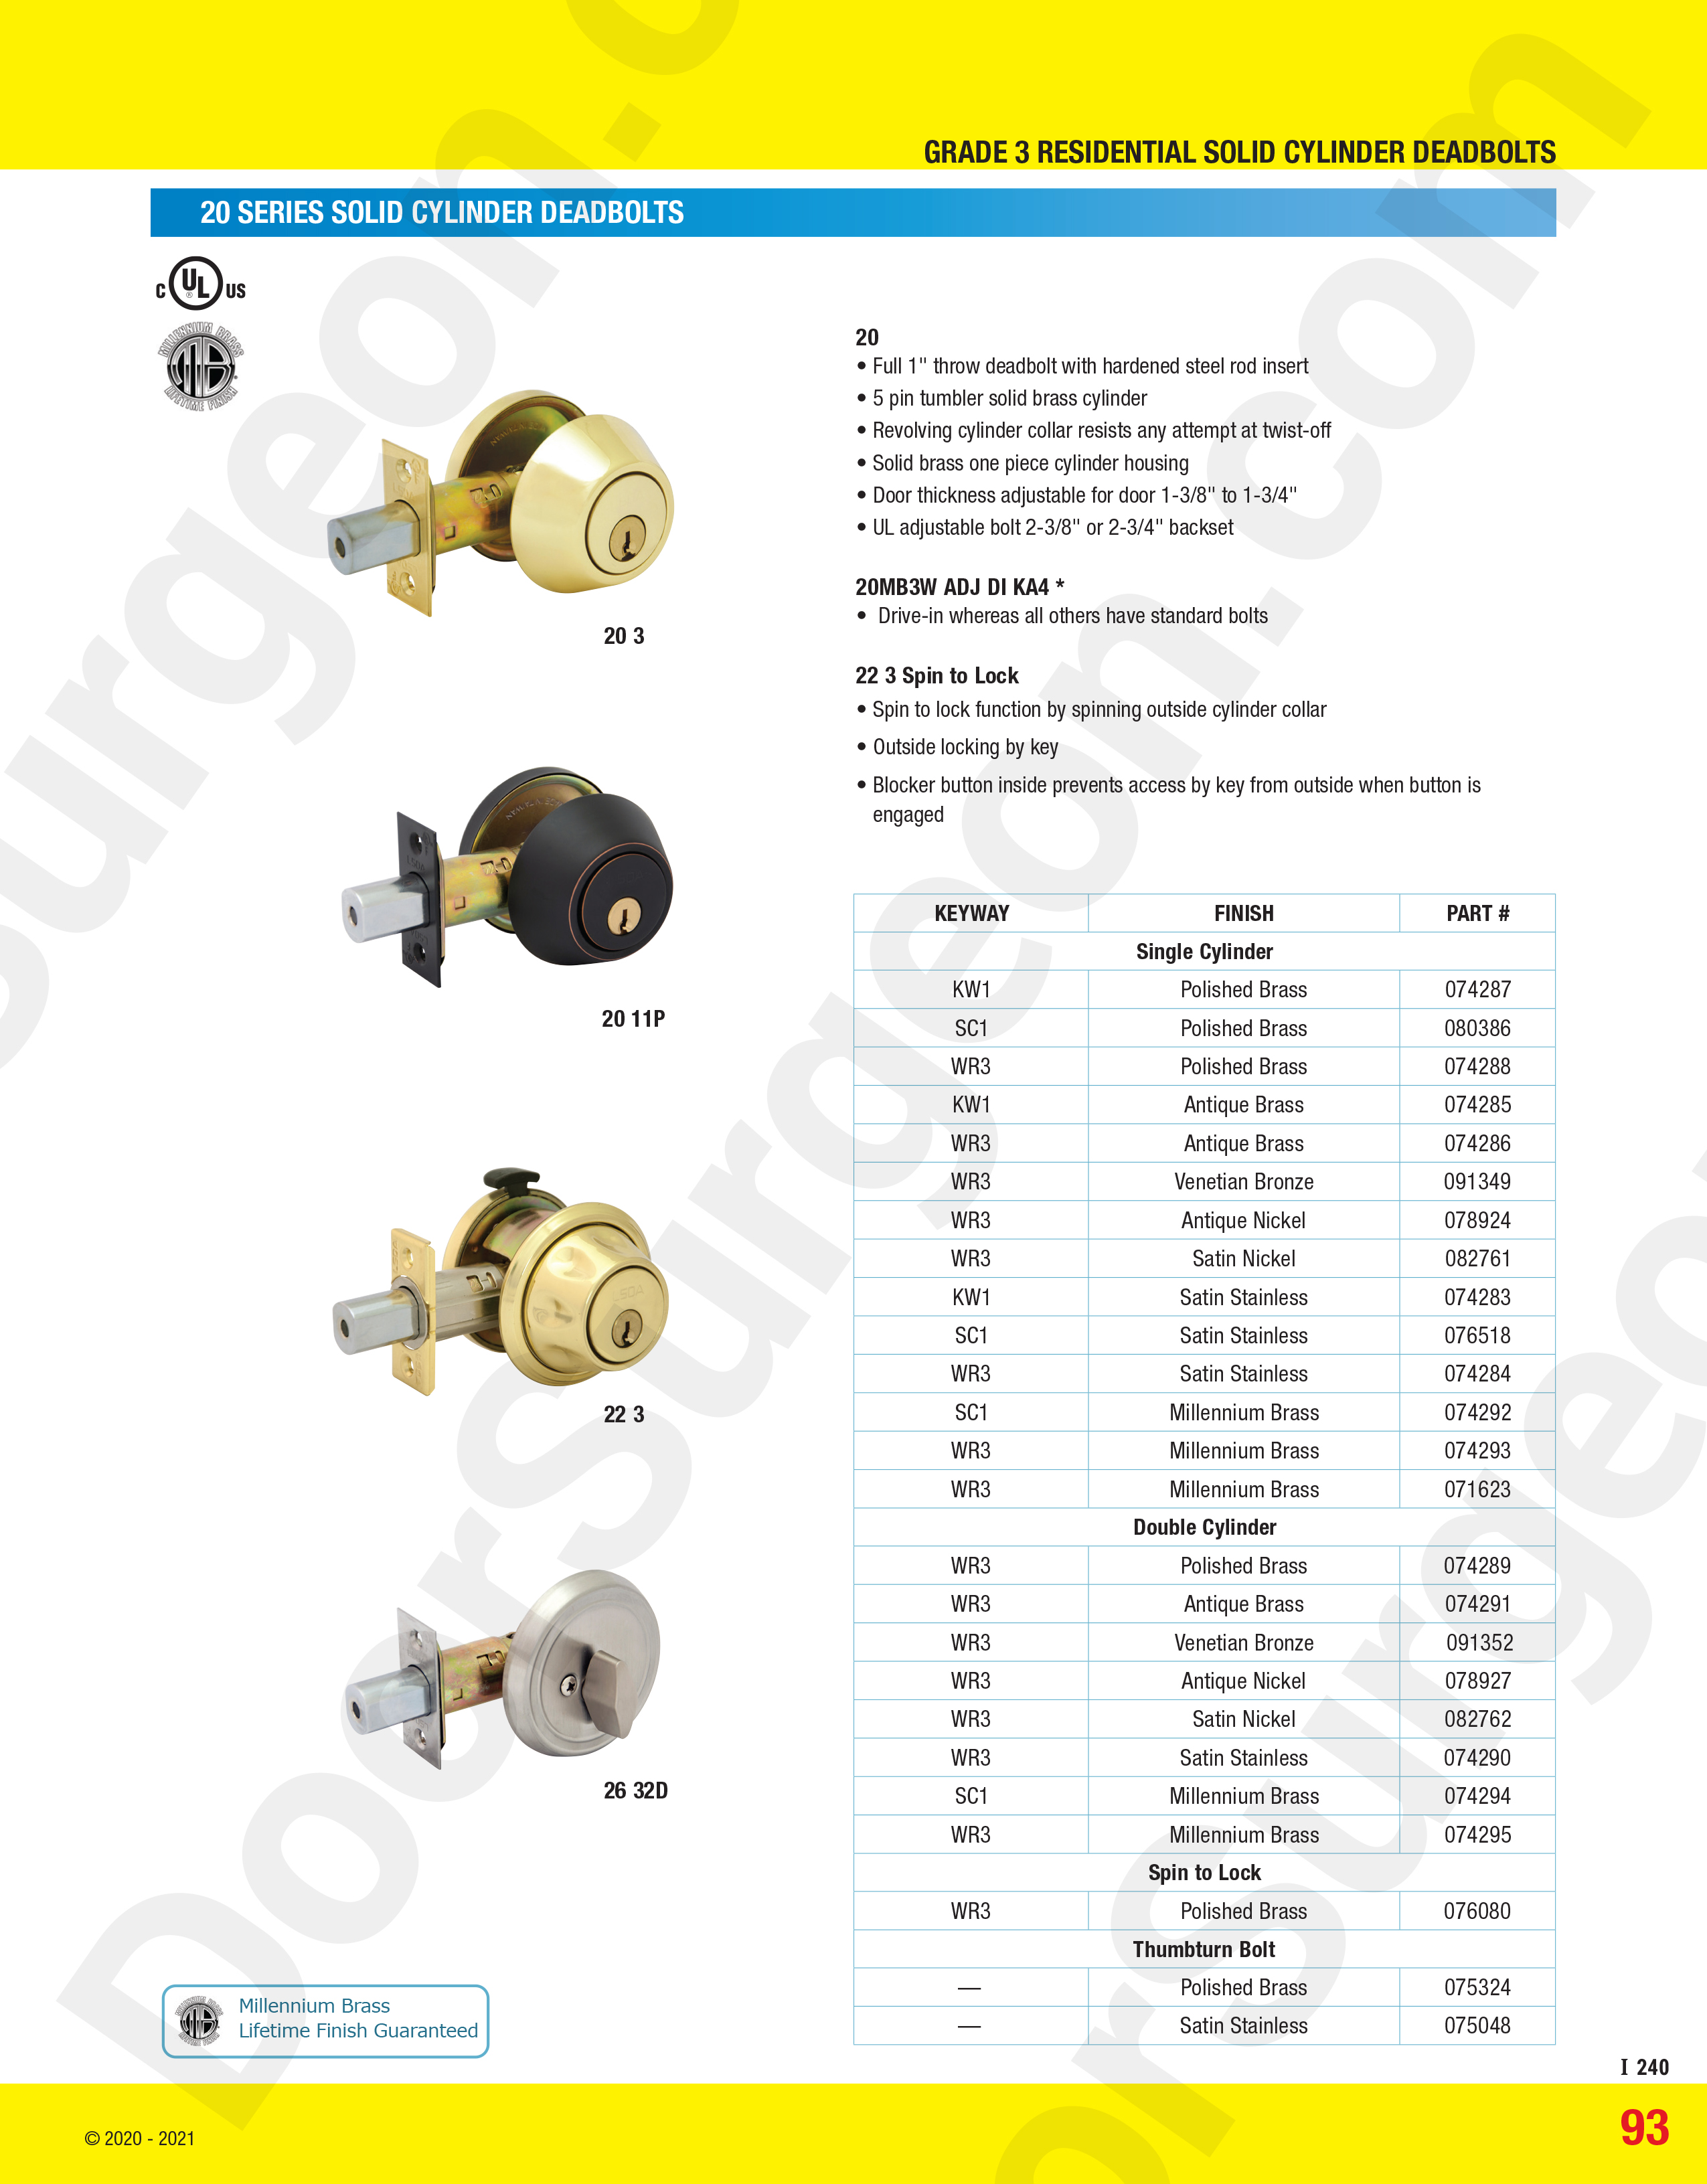 High grade deadbolts come in variety of colours, single-sided cylinder or double-sided cylinder.